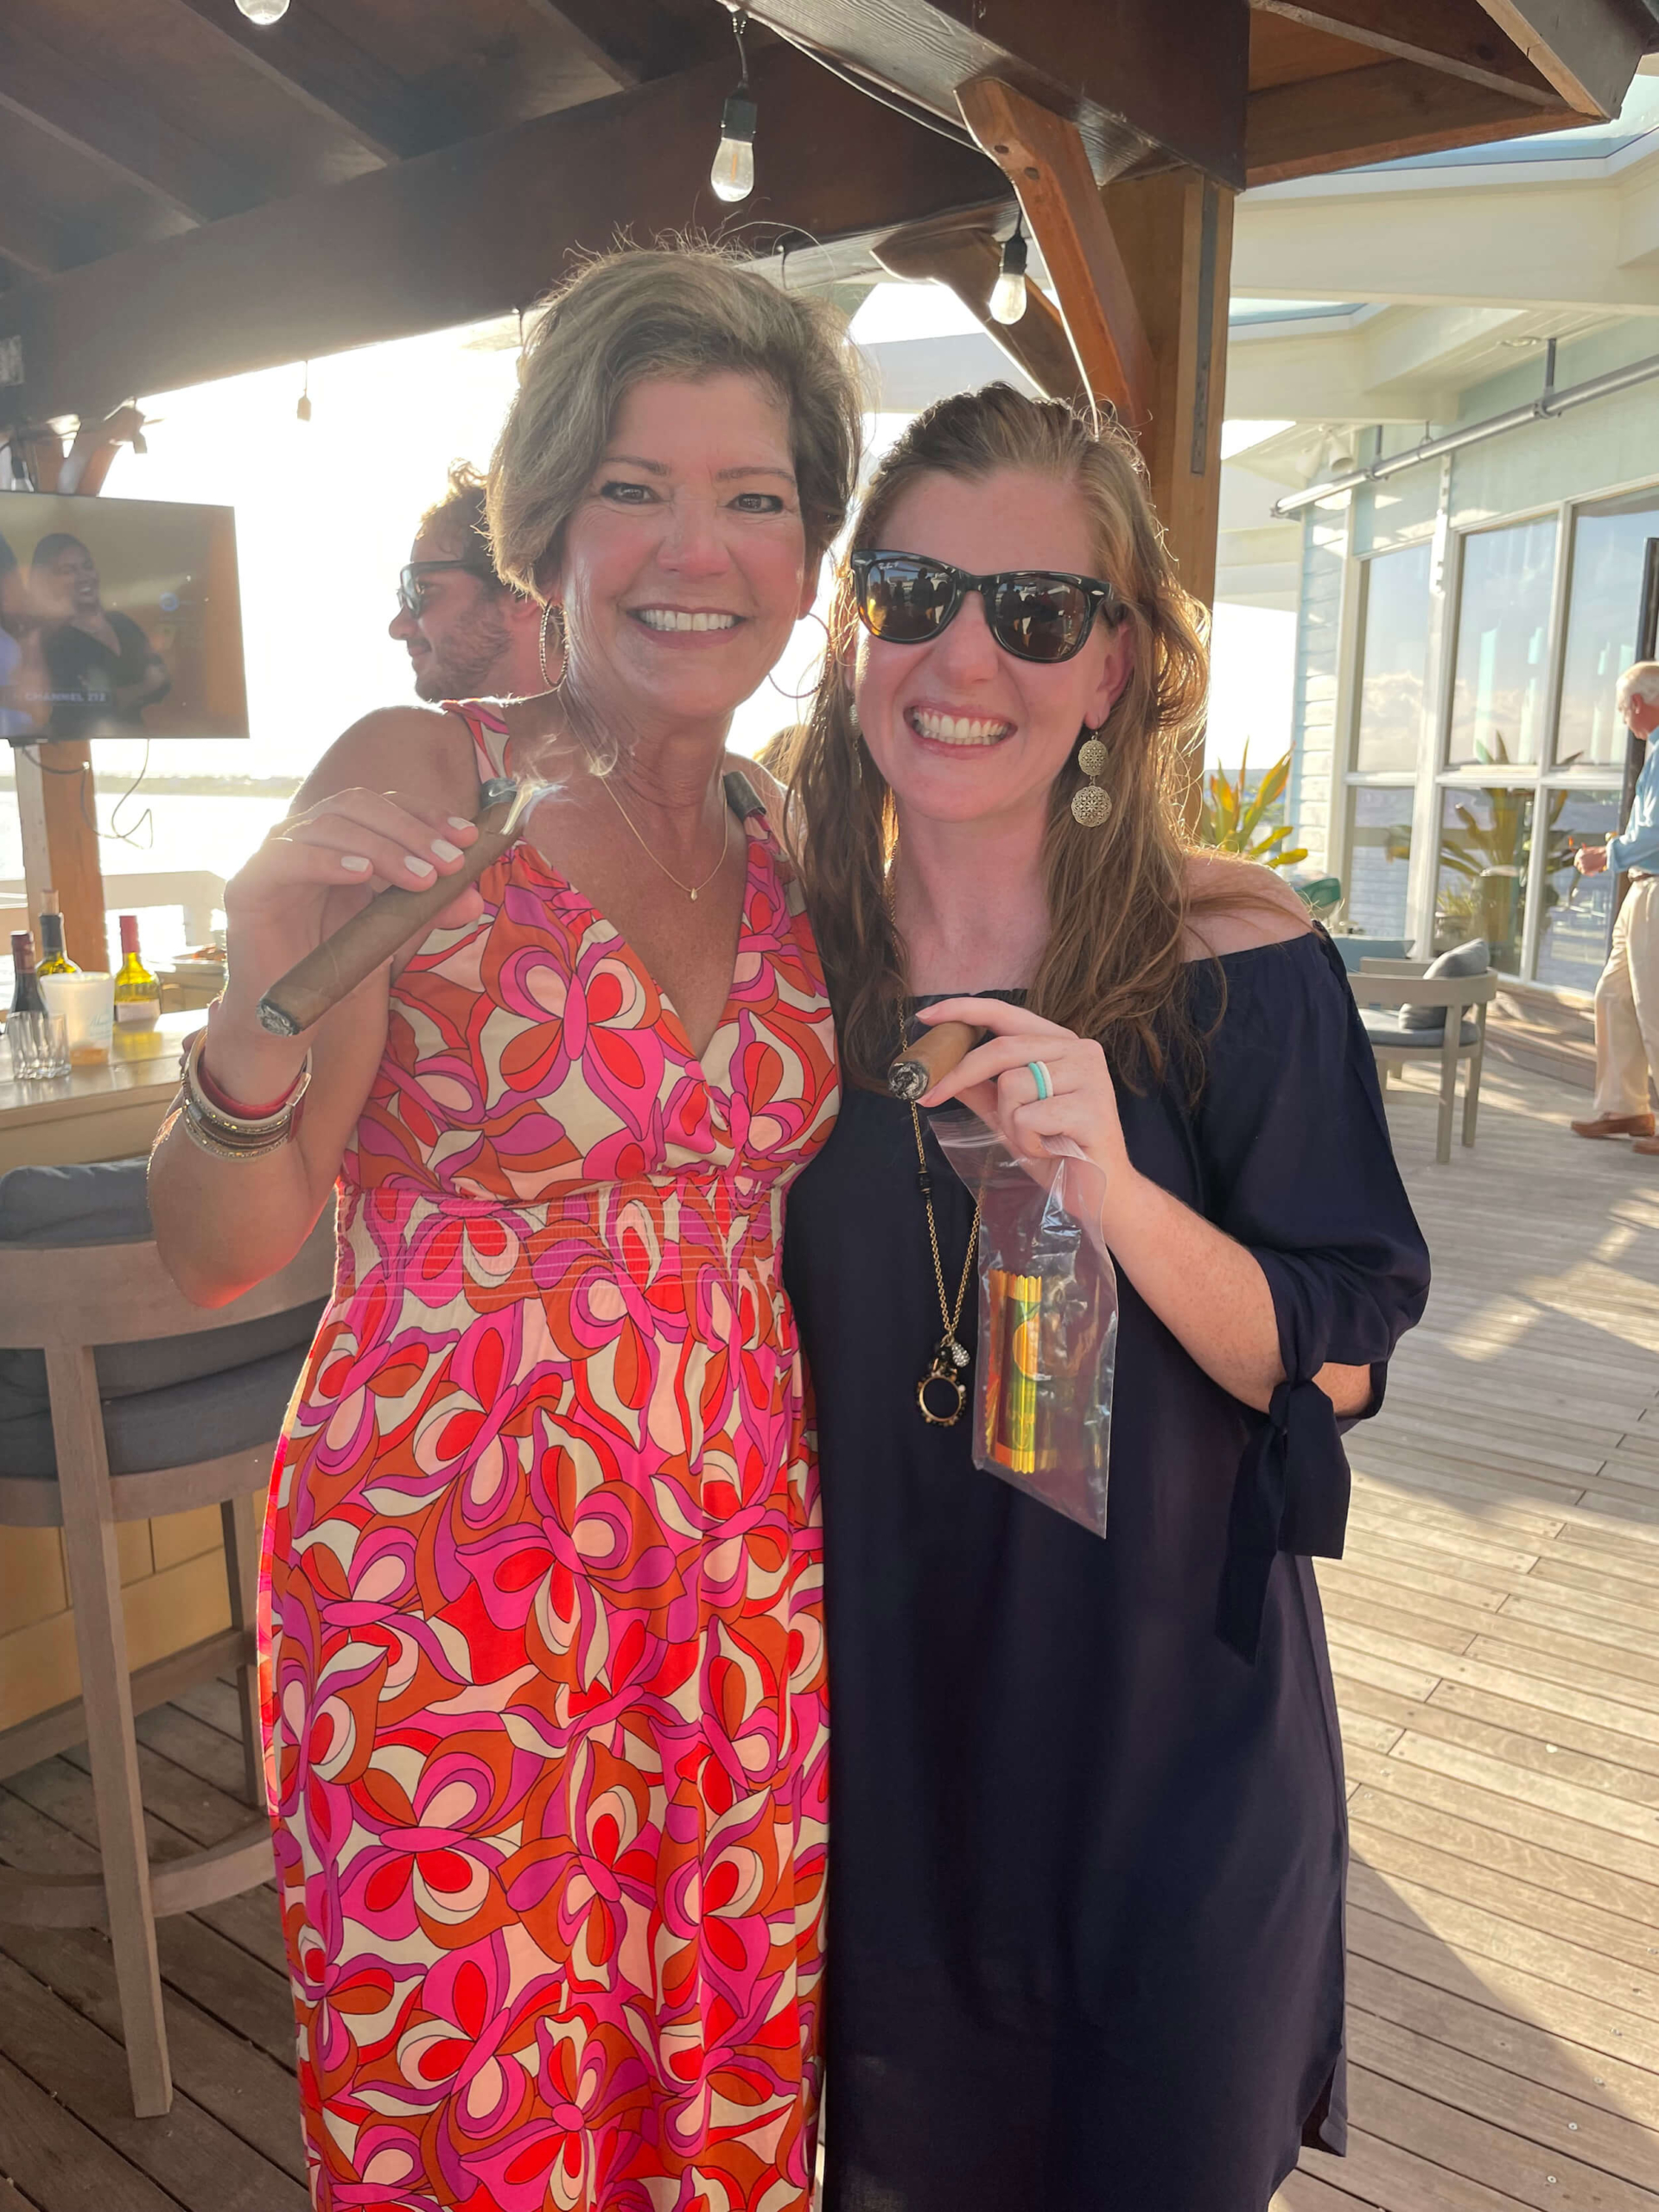 Smiling guests holding cigars at an event, representing the sophisticated club lifestyle and coastal living at The Abaco Club.